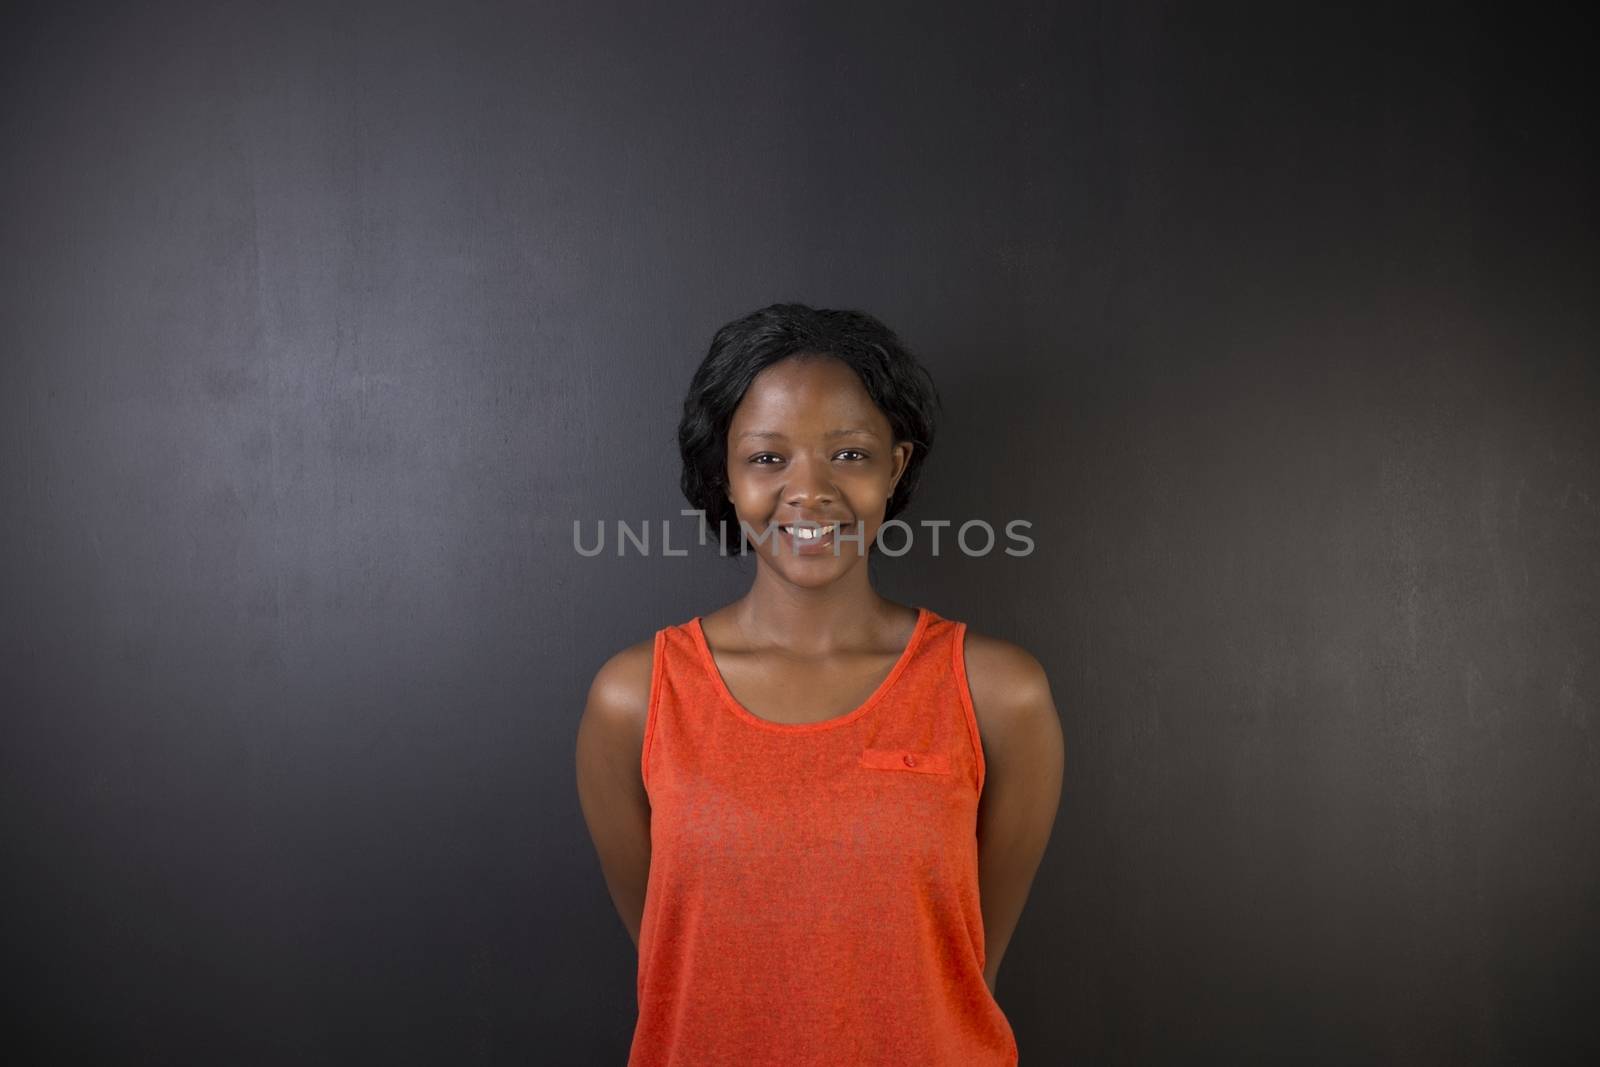 South African or African American woman teacher or student against a dark blackboard background